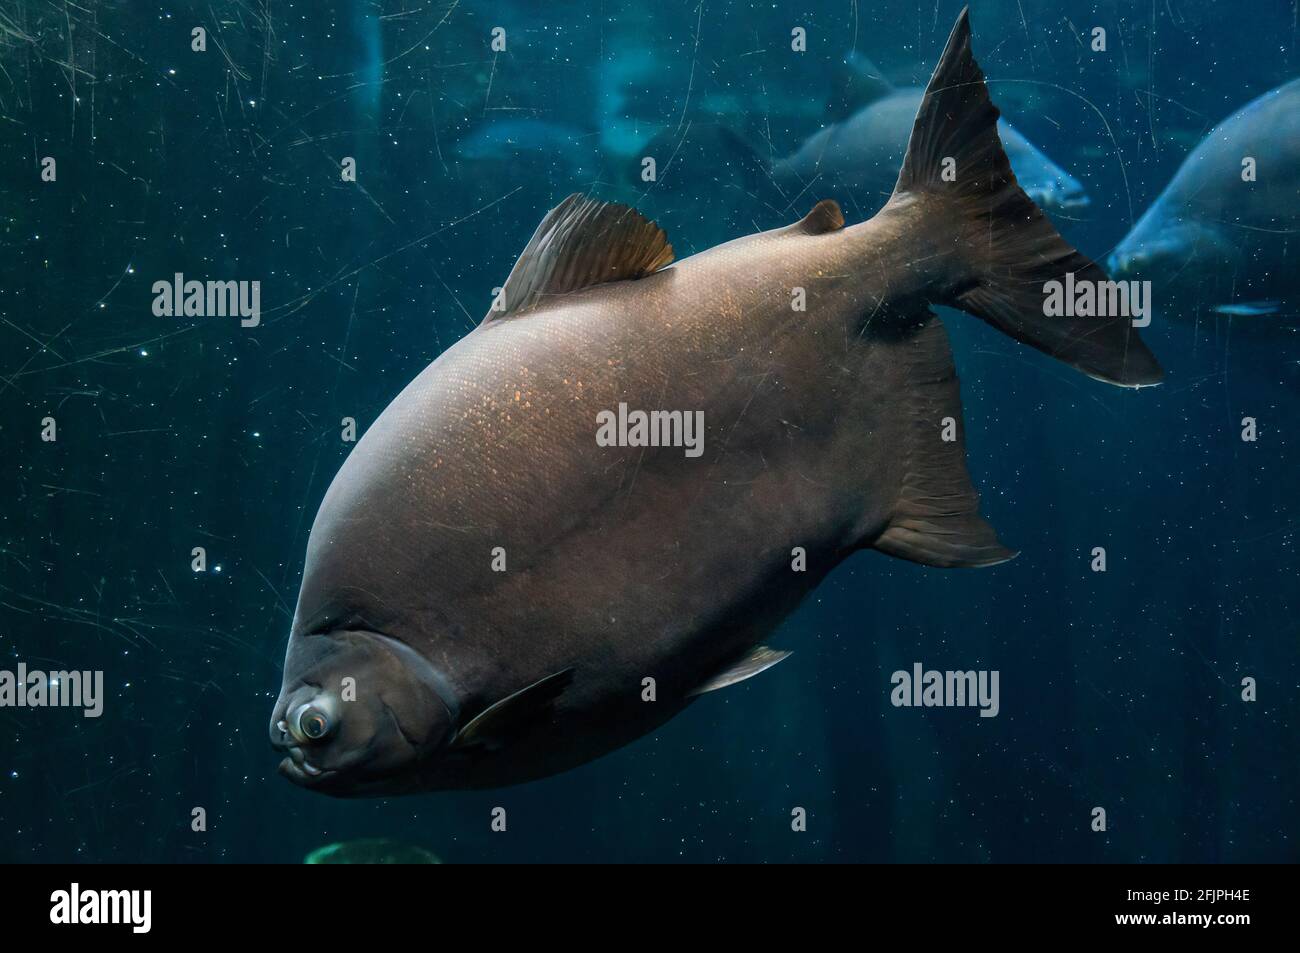 A Tambaqui (Colossoma macropomum - large species of freshwater fish in the family Serrasalmidae) swimming in his freshwater tank in Sao Paulo aquarium Stock Photo